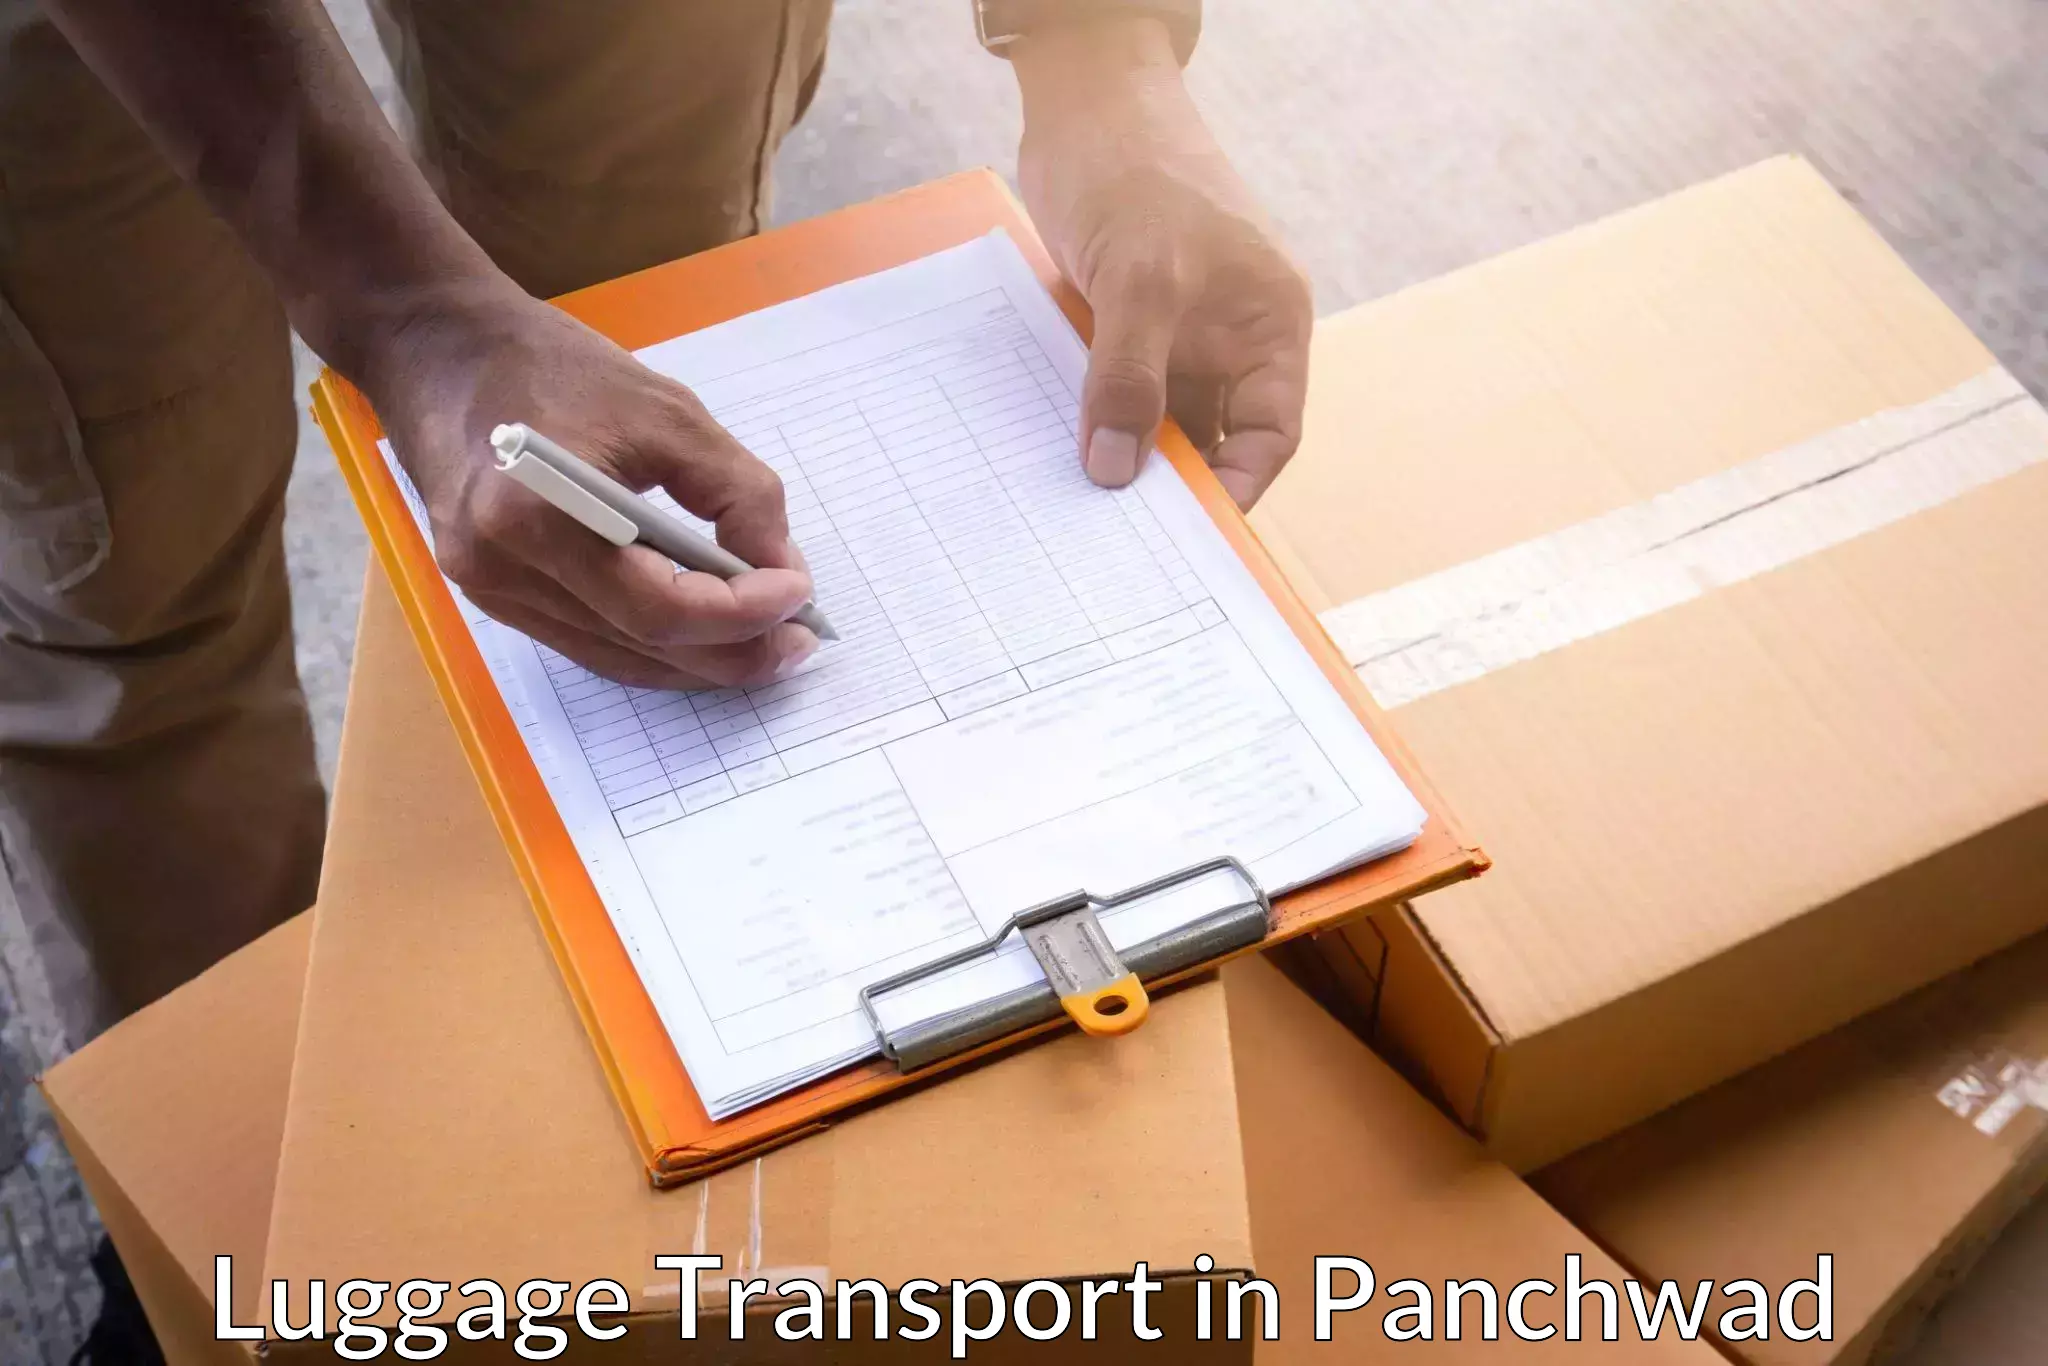 Baggage shipping experience in Panchwad